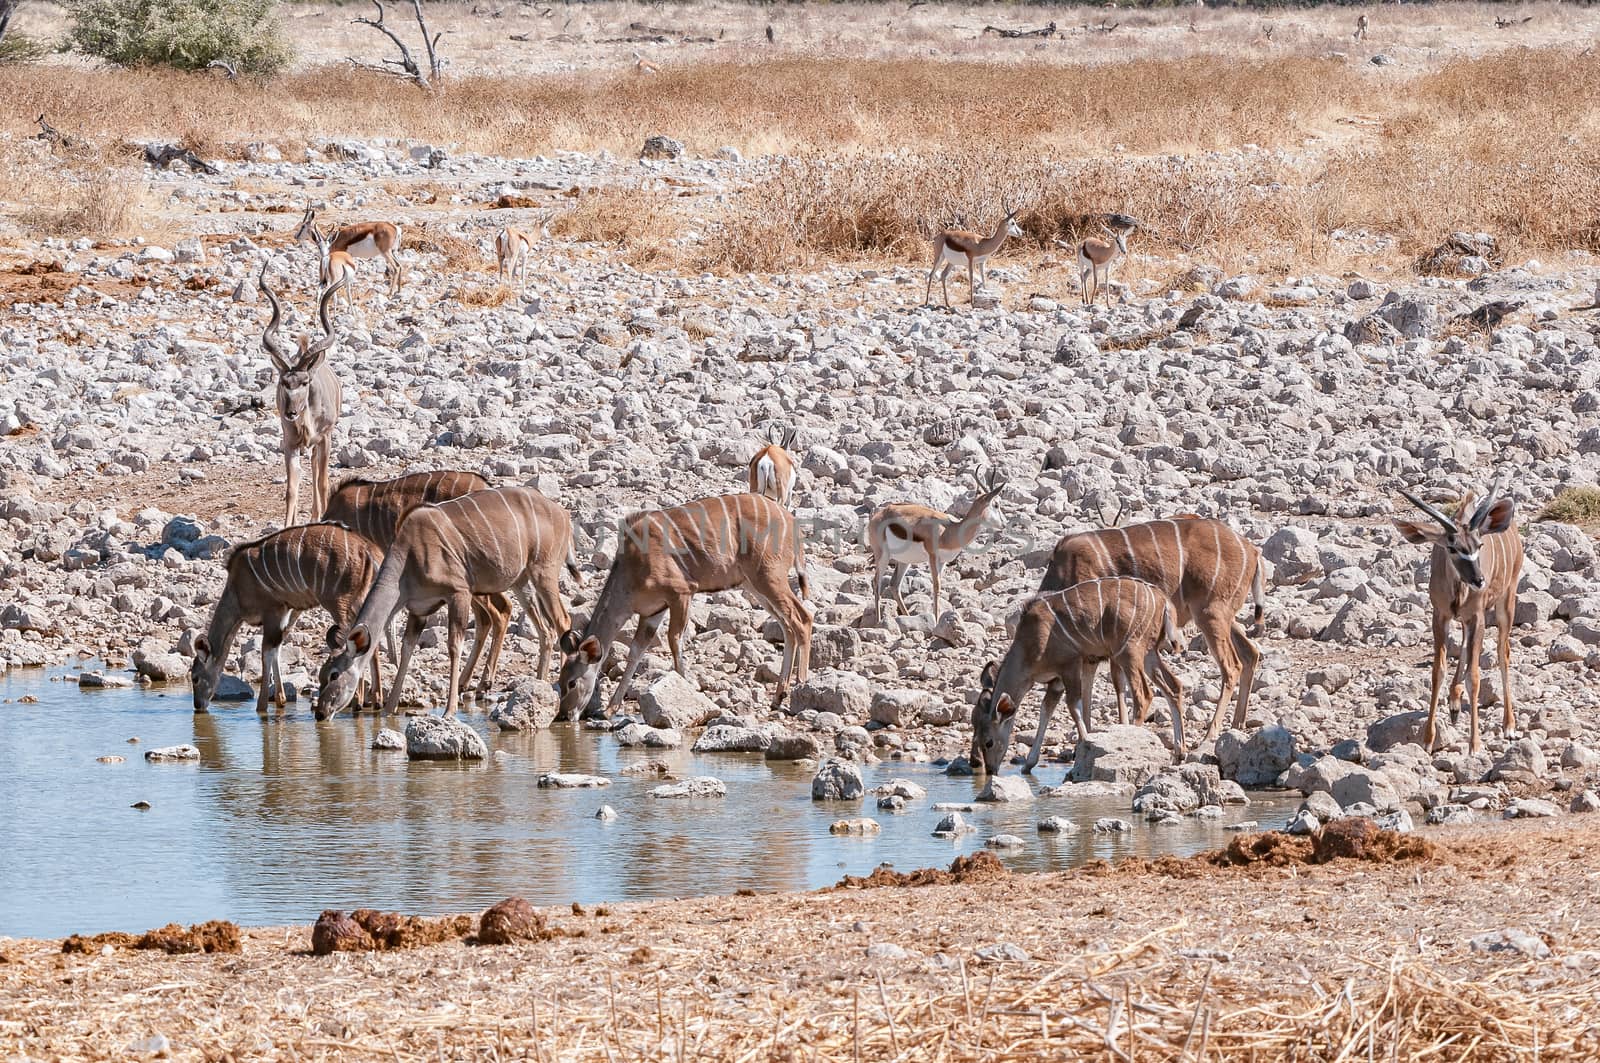 Kudus and springbok drinking water at a waterhole by dpreezg